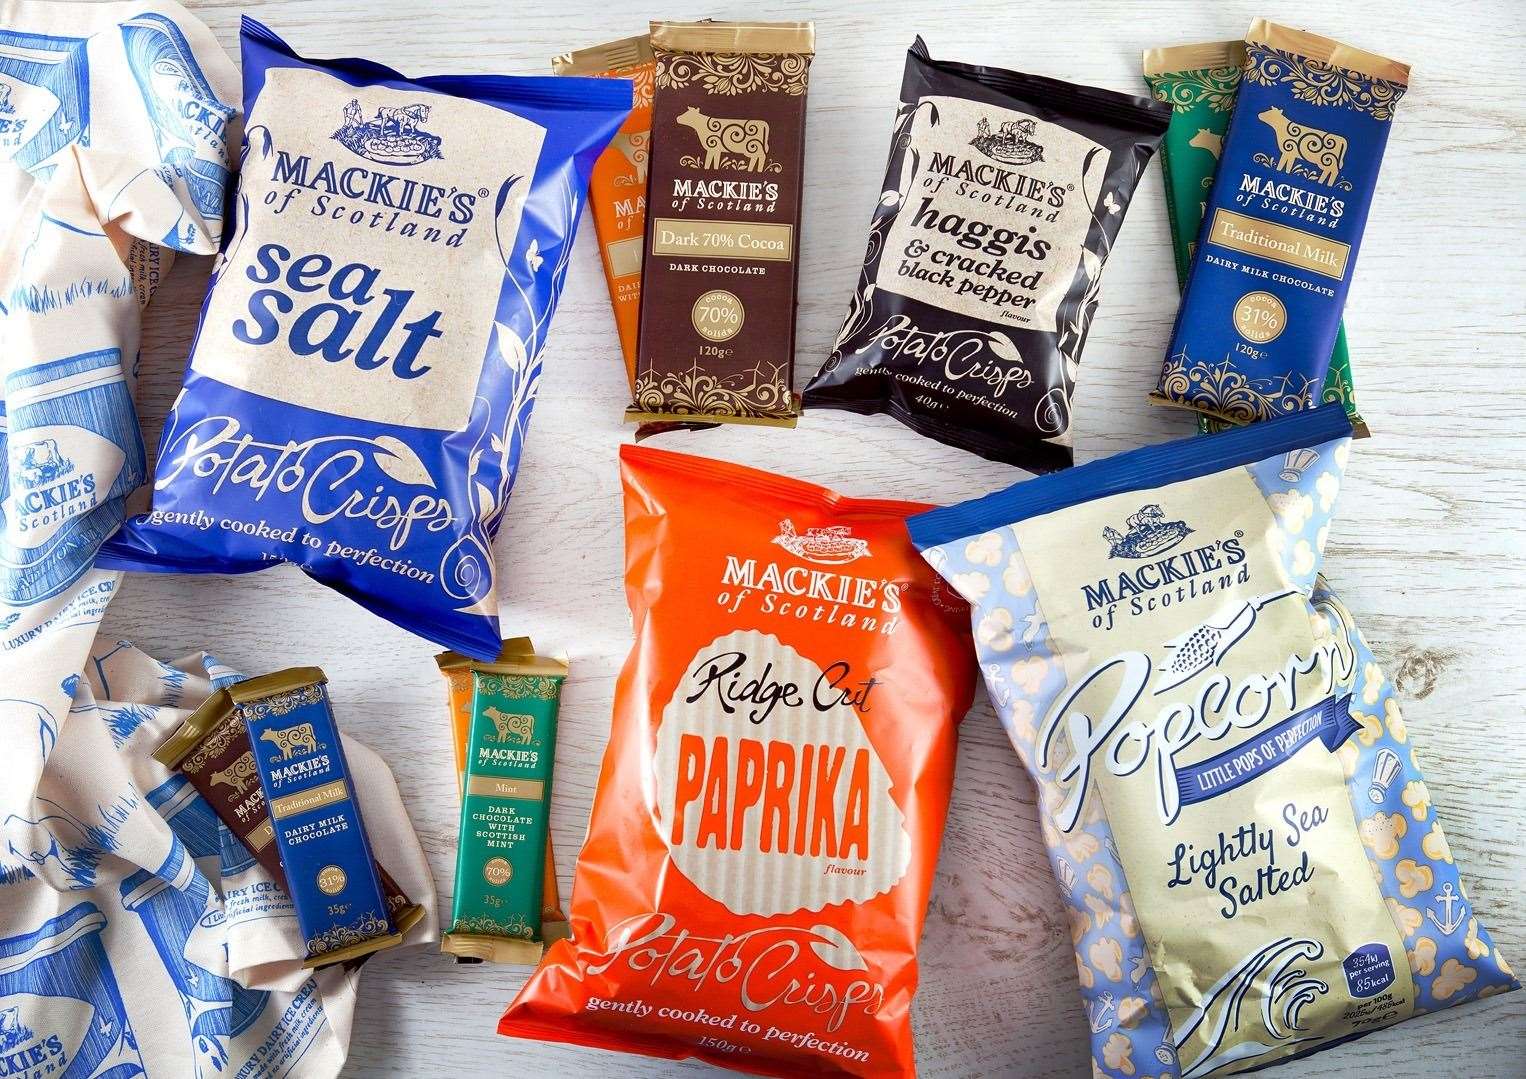 Mackies products have diversified over the year's into crisps and chocolate ranges helping them to build a strong export market.